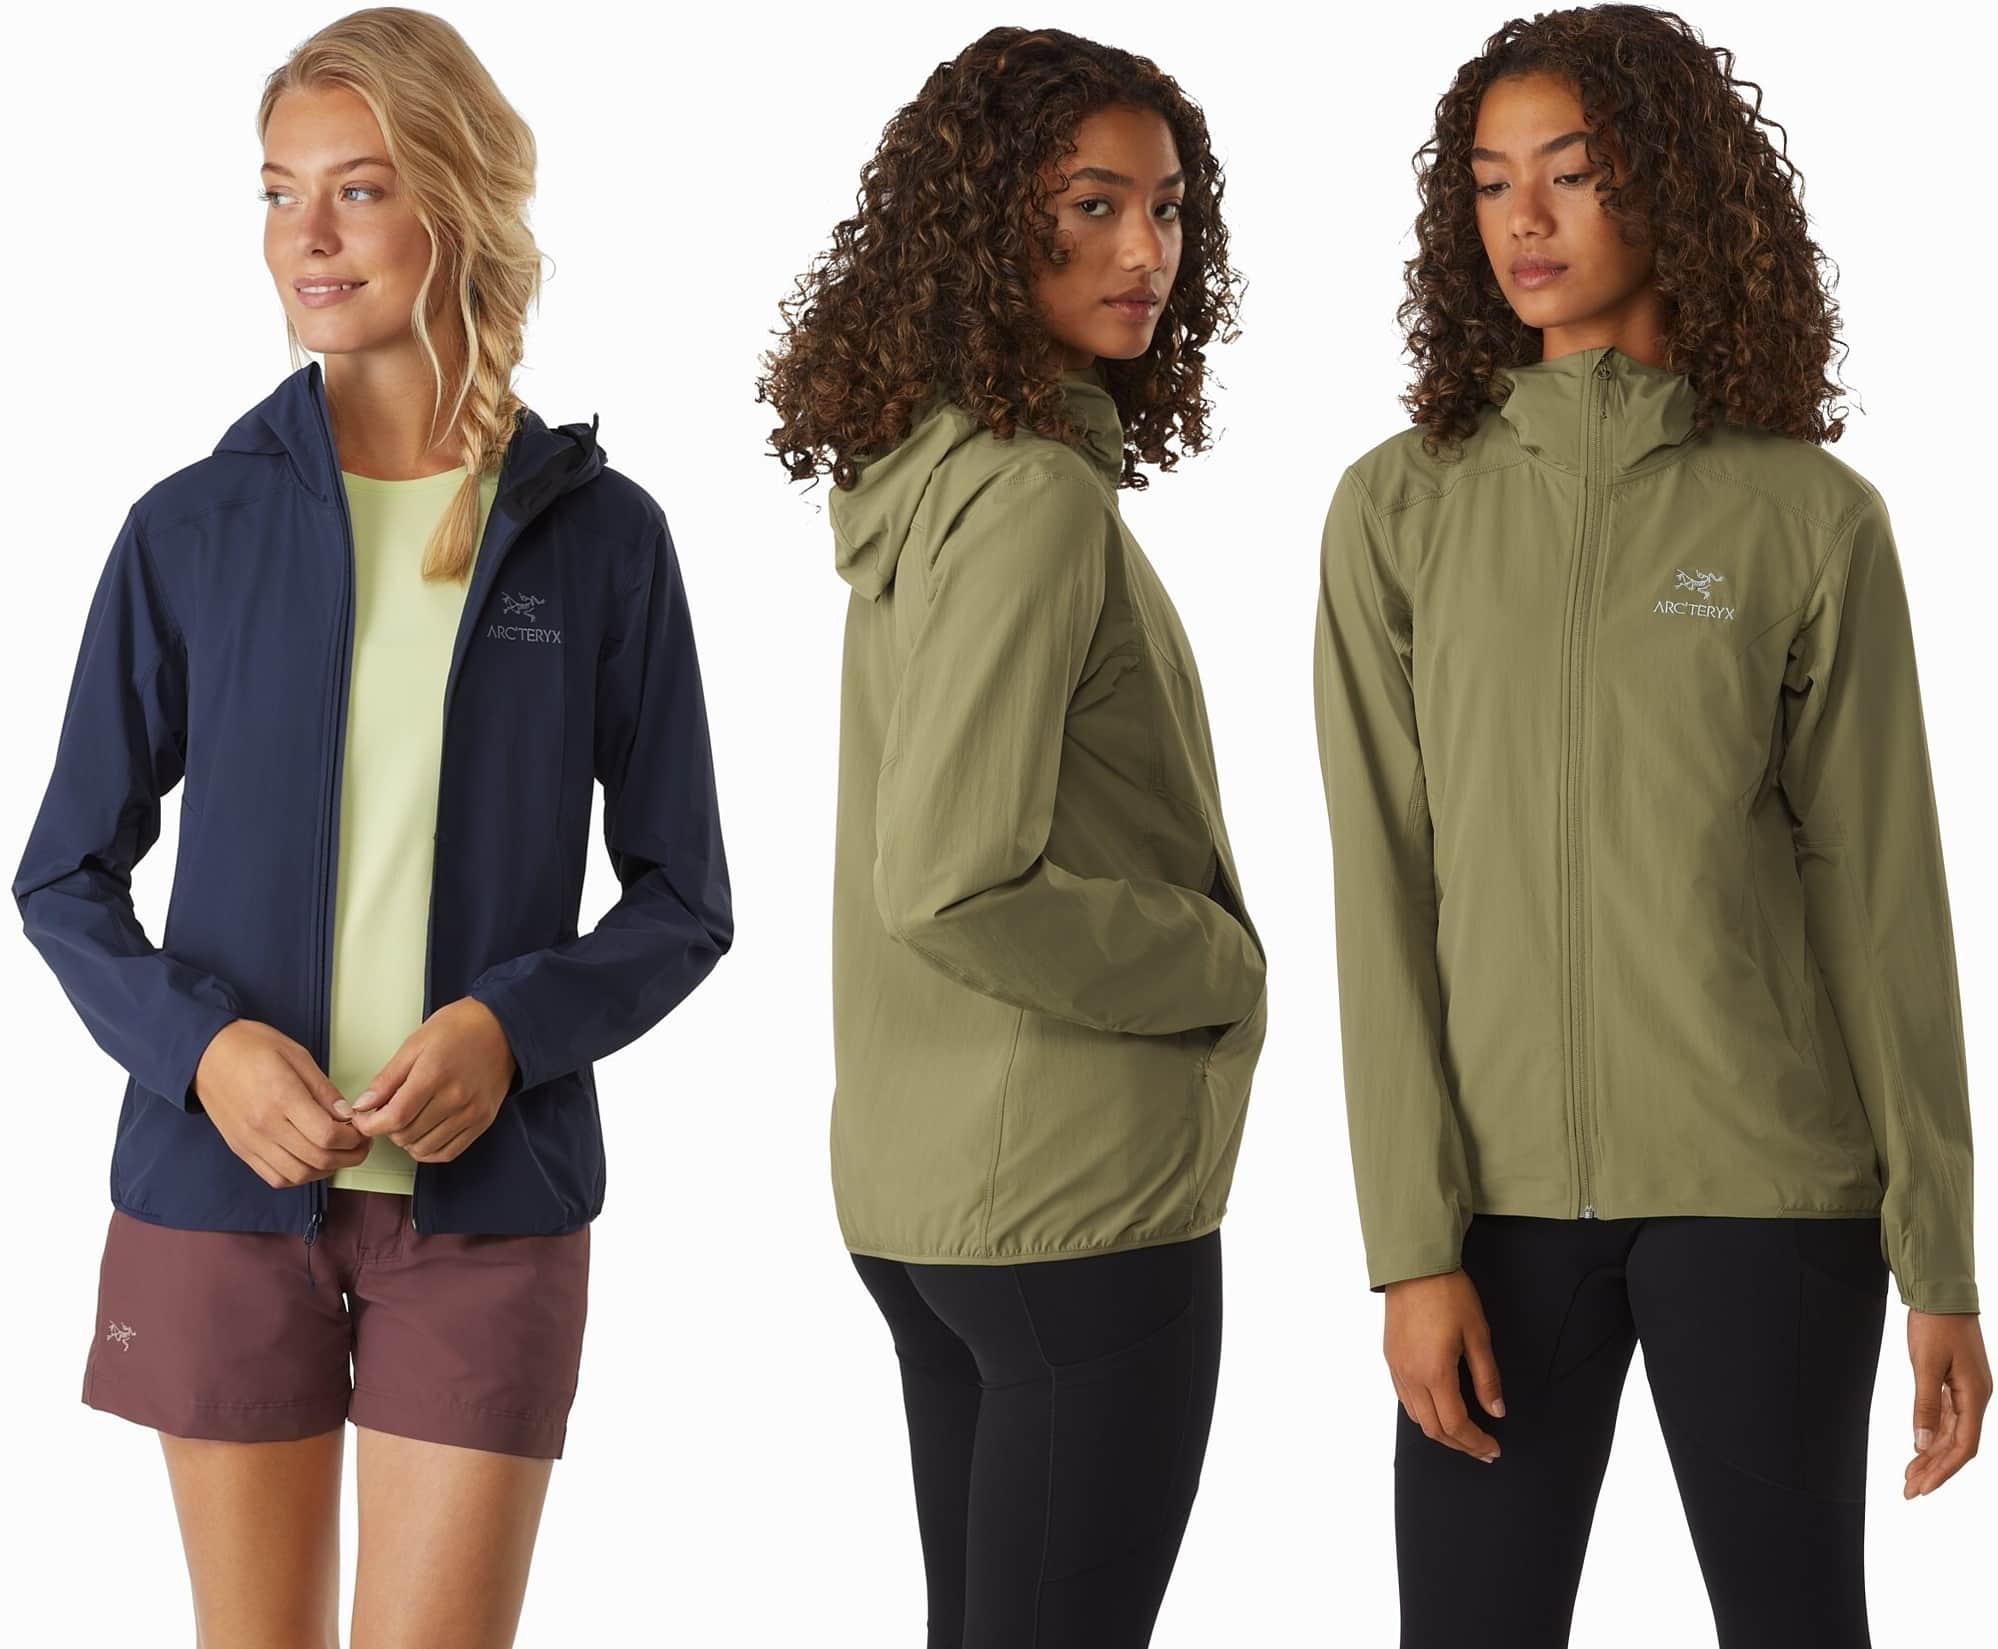 Versatile, superlight softshell for hiking and a range of active mountain adventures